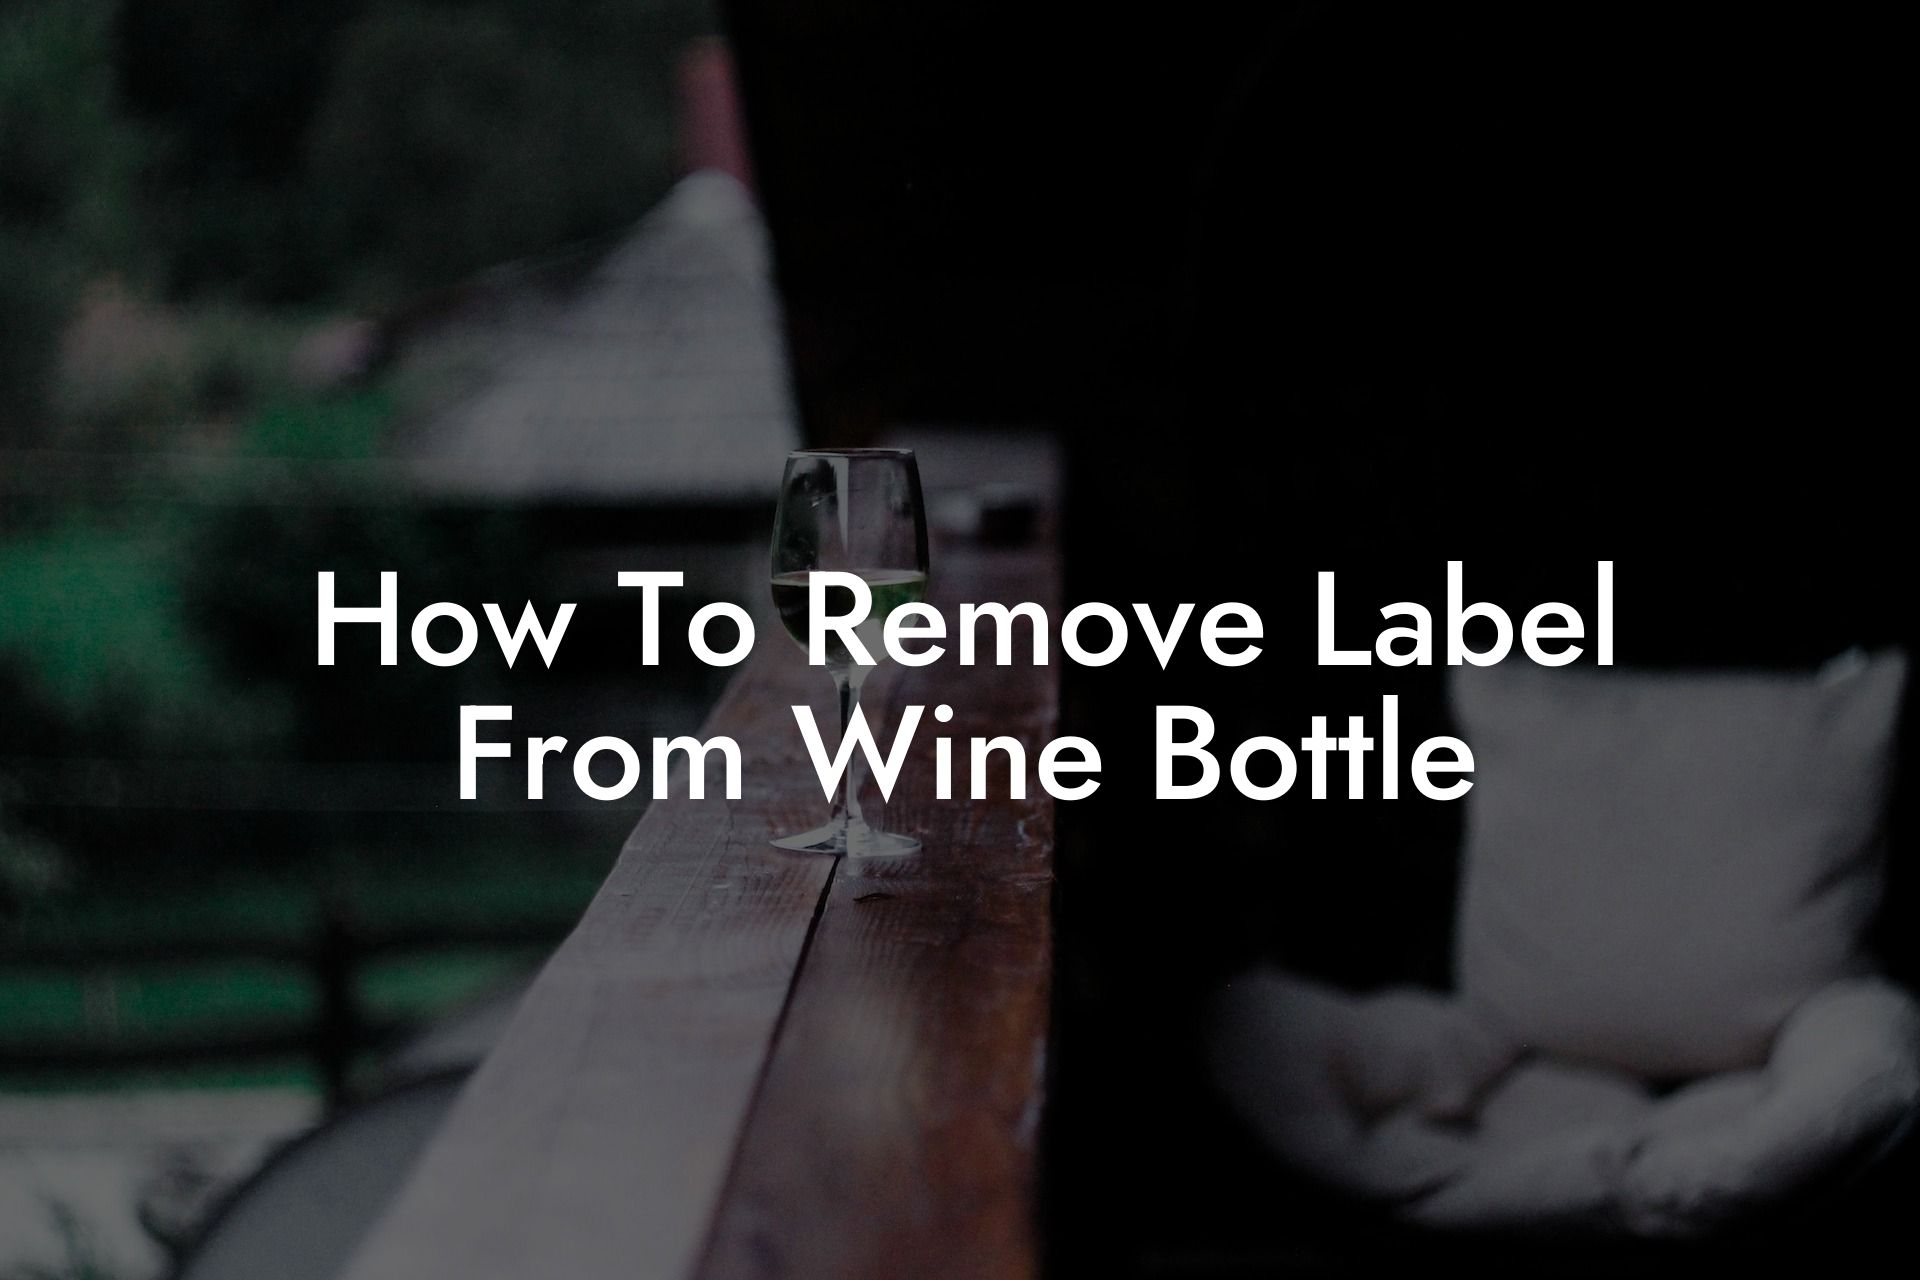 How To Remove Label From Wine Bottle